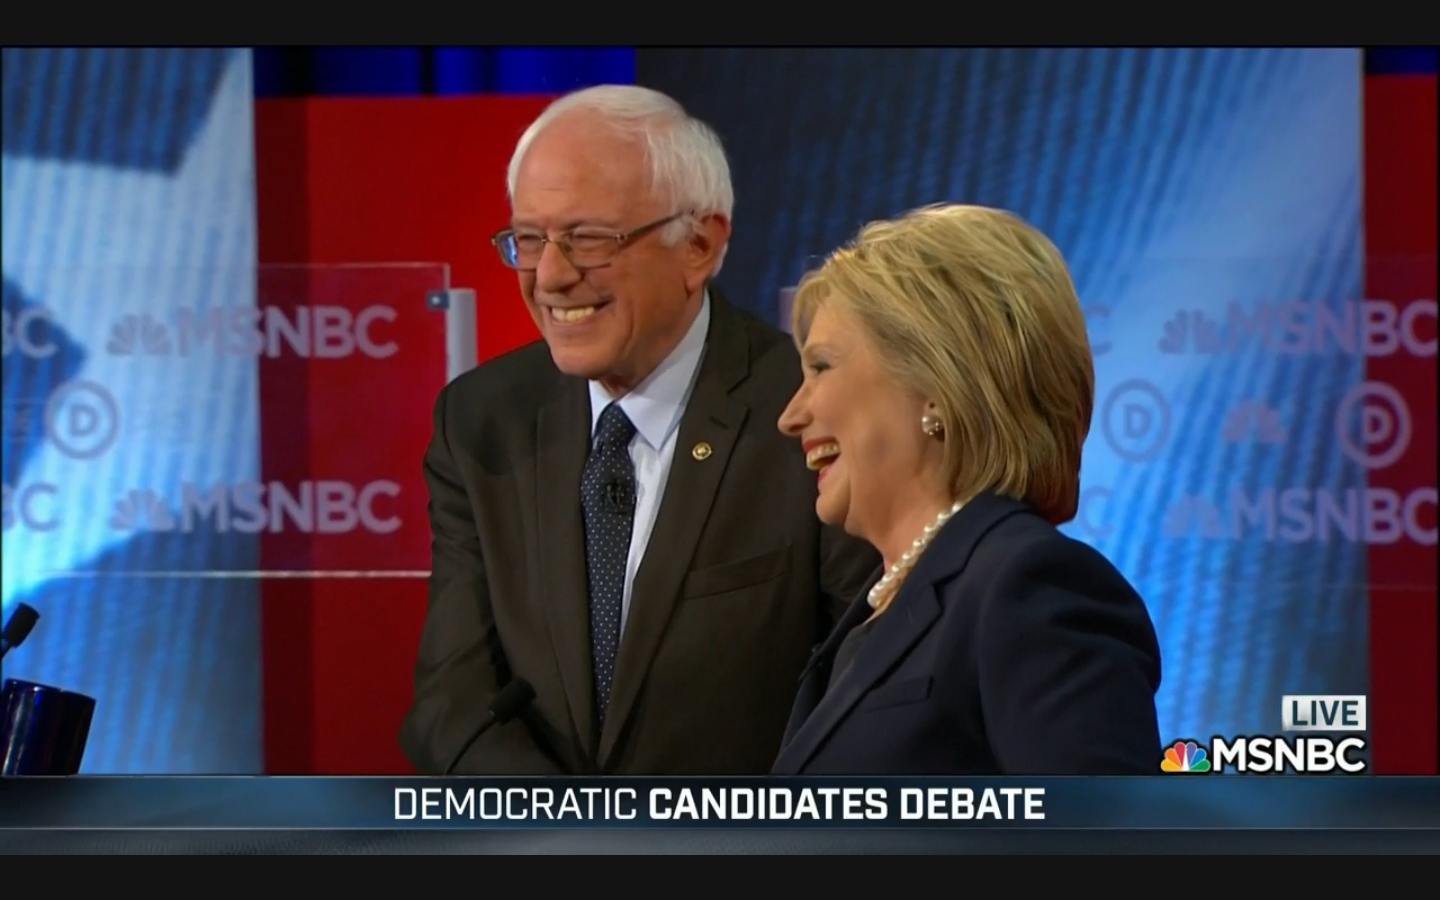 Bernie Sanders and Hillary Clinton shake hands and smile